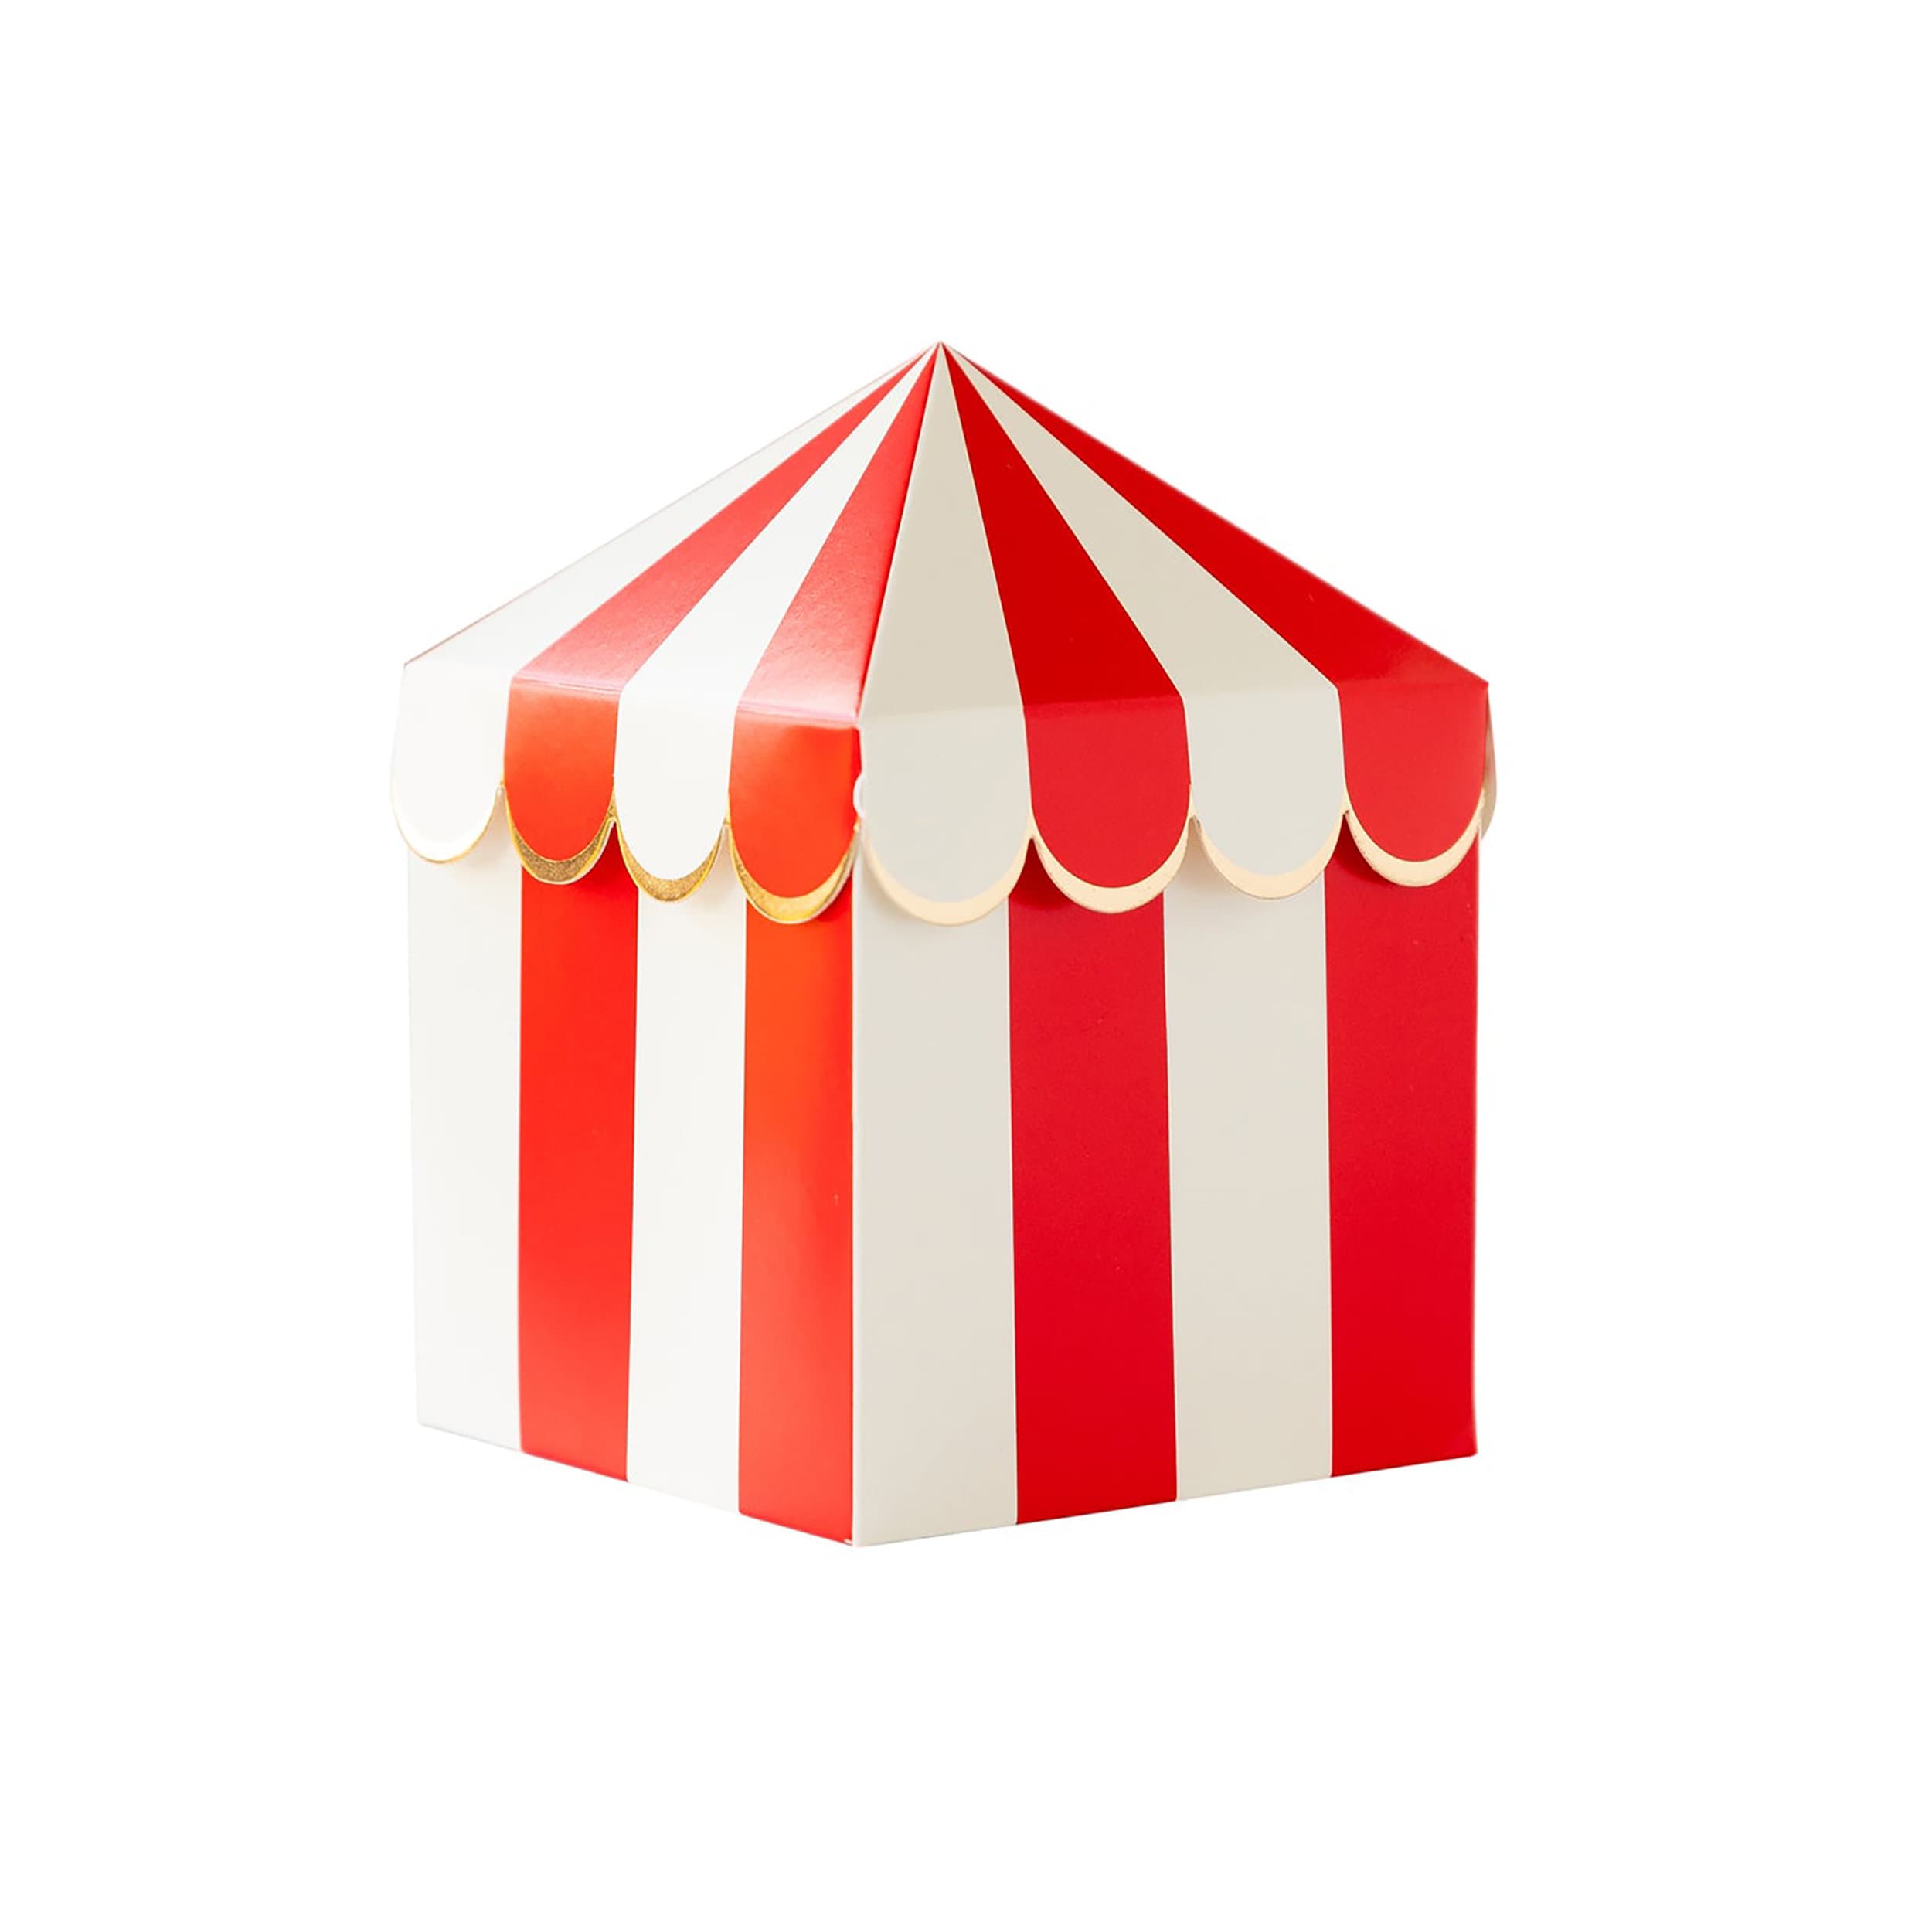 Circus Party Favors | Carnival Theme Party - Carnival Party Supplies - Carnival Birthday Party - Circus Birthday Party - Circus Theme Party